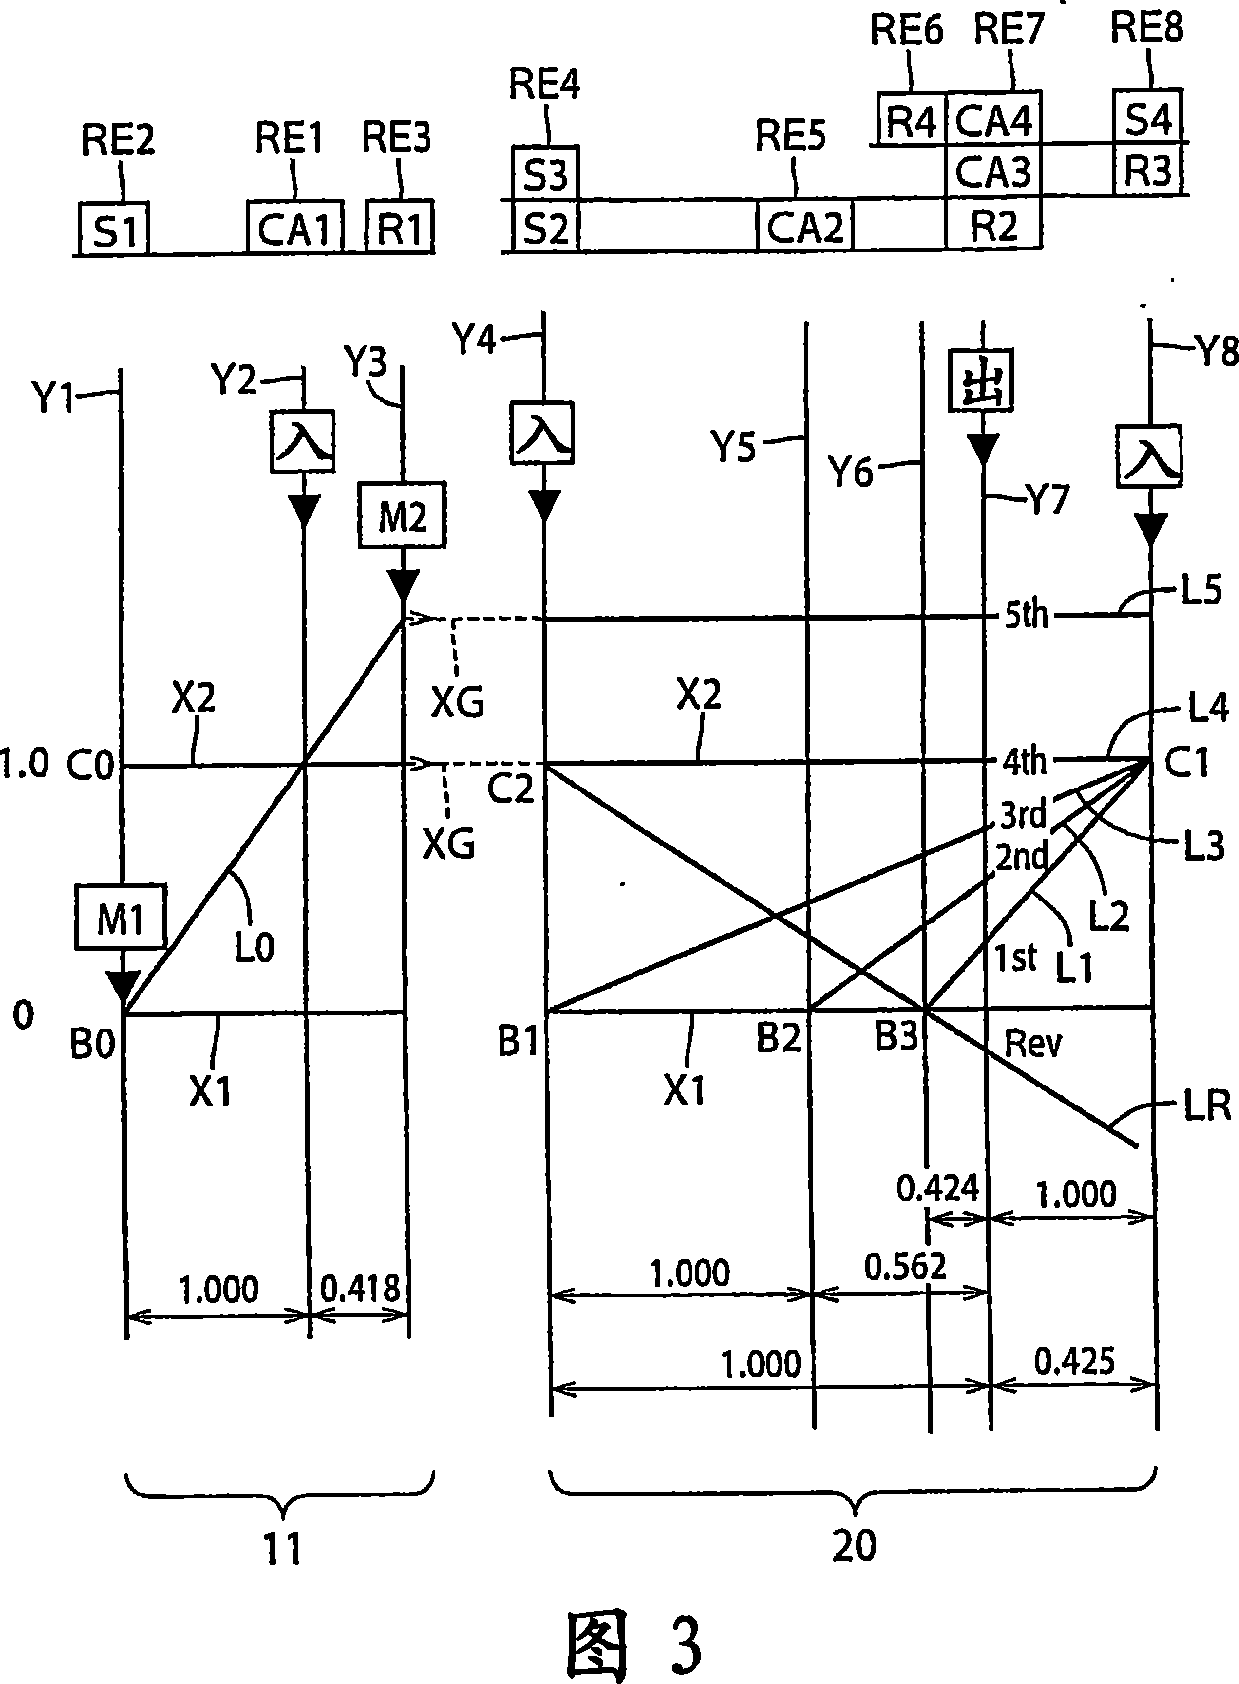 Vehicle drive device controller